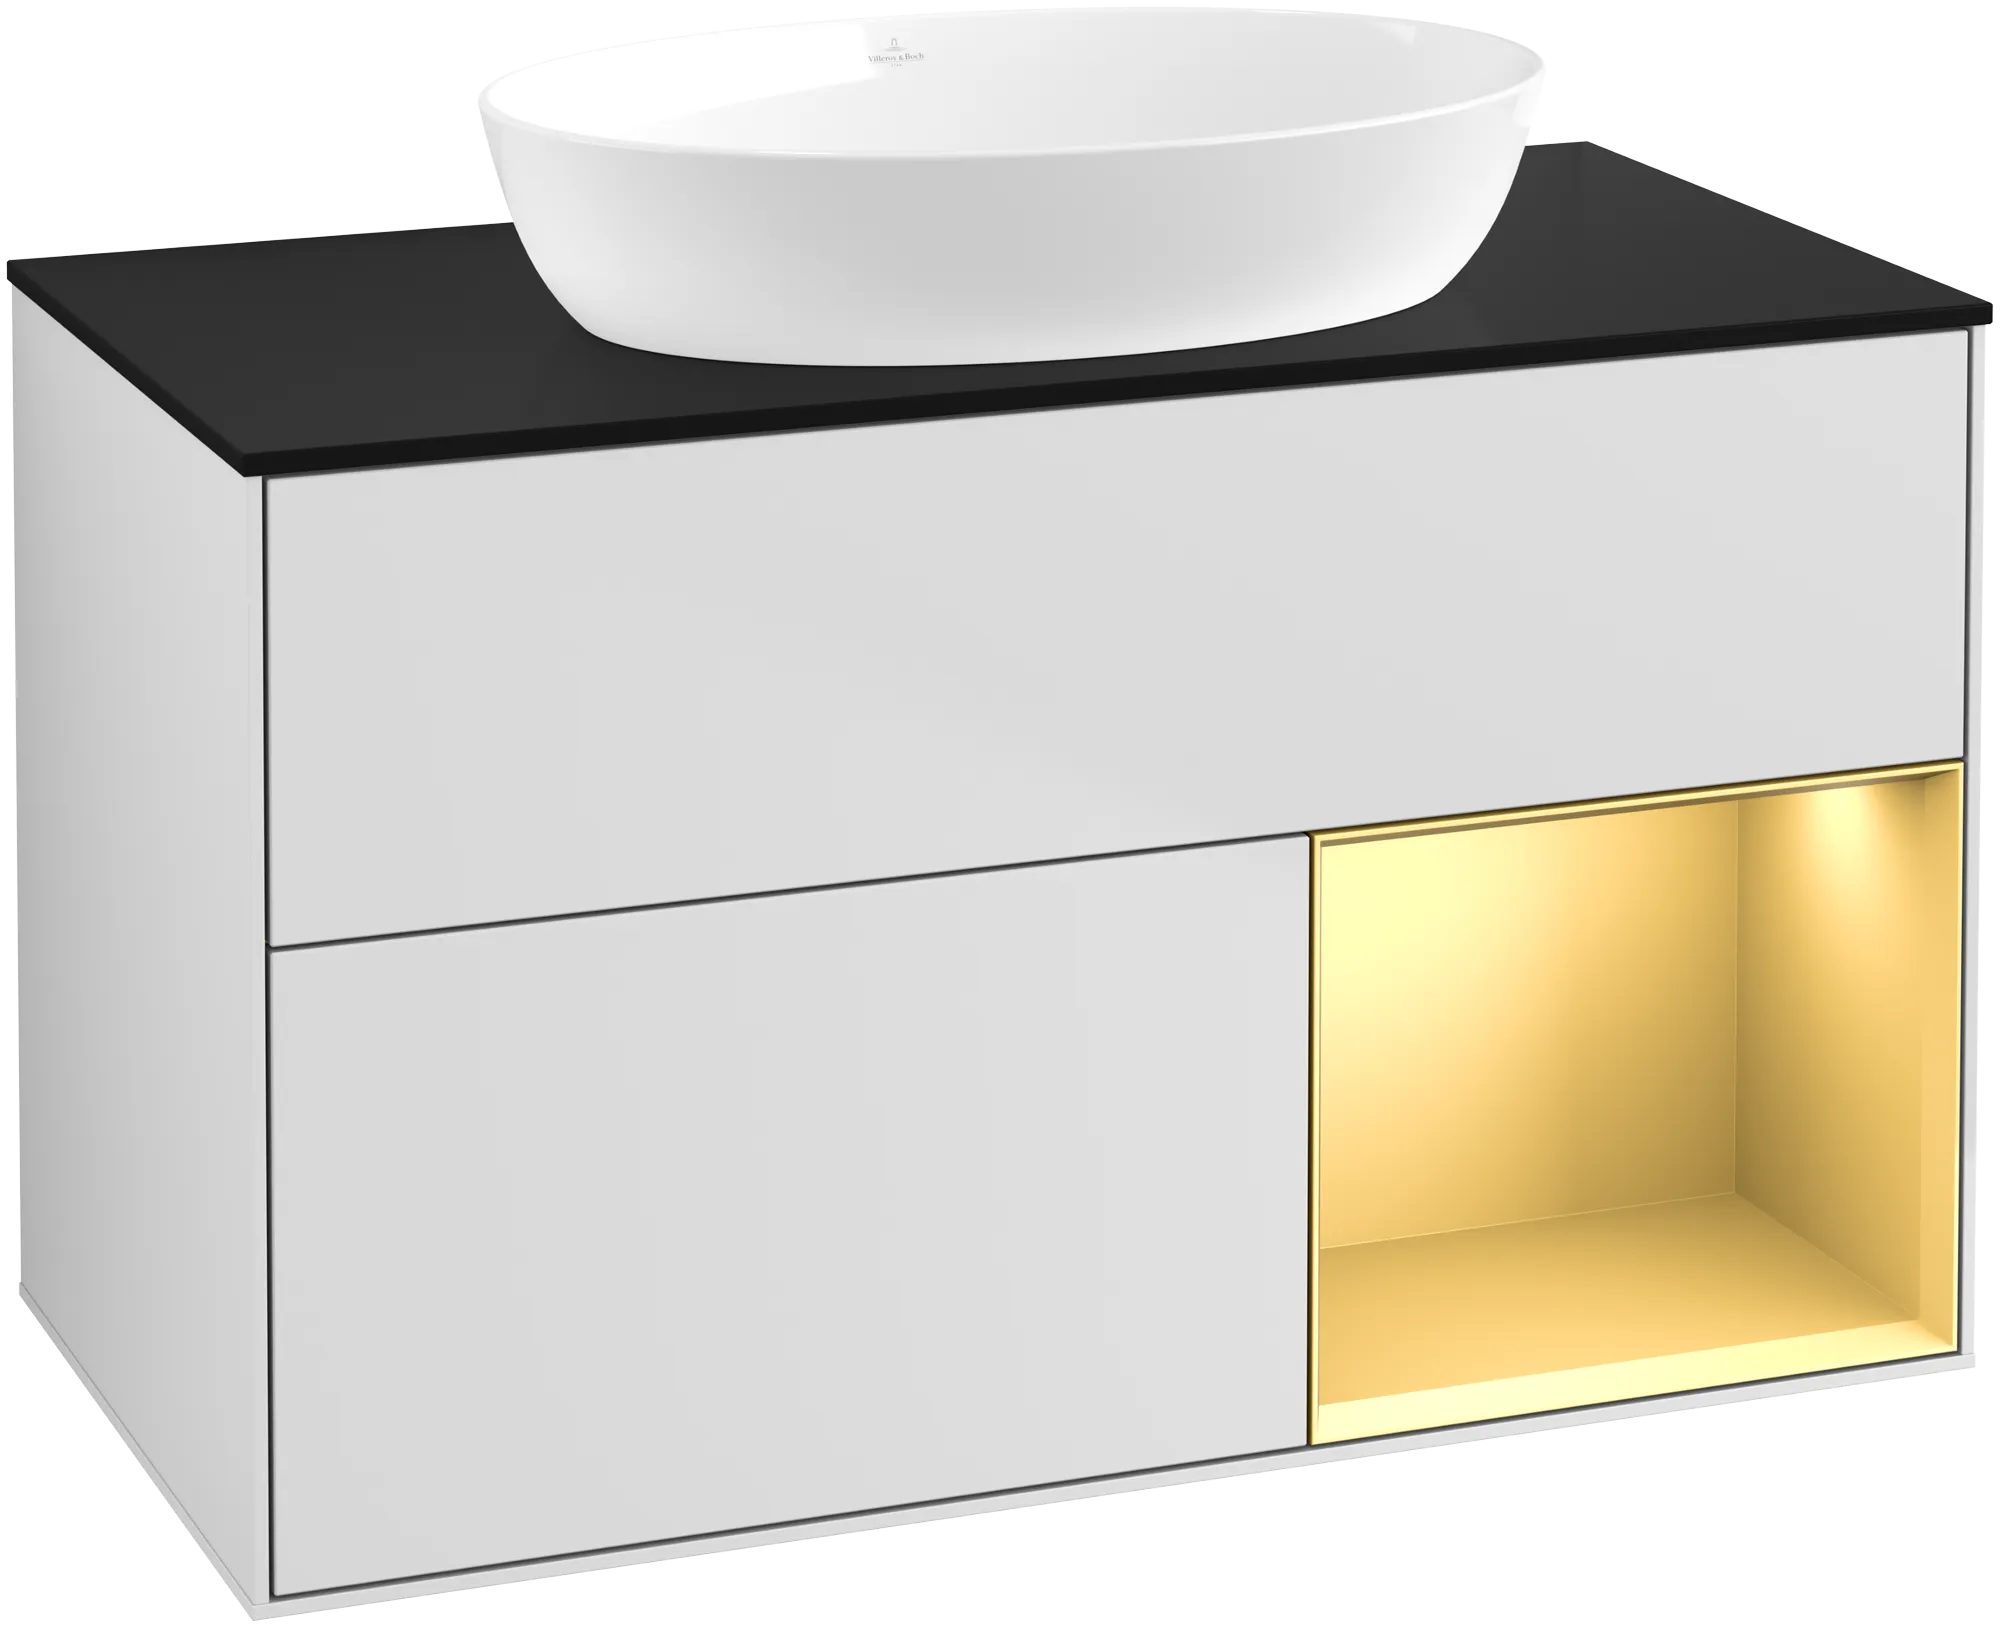 Picture of VILLEROY BOCH Finion Vanity unit, with lighting, 2 pull-out compartments, 1000 x 603 x 501 mm, White Matt Lacquer / Gold Matt Lacquer / Glass Black Matt #GA22HFMT